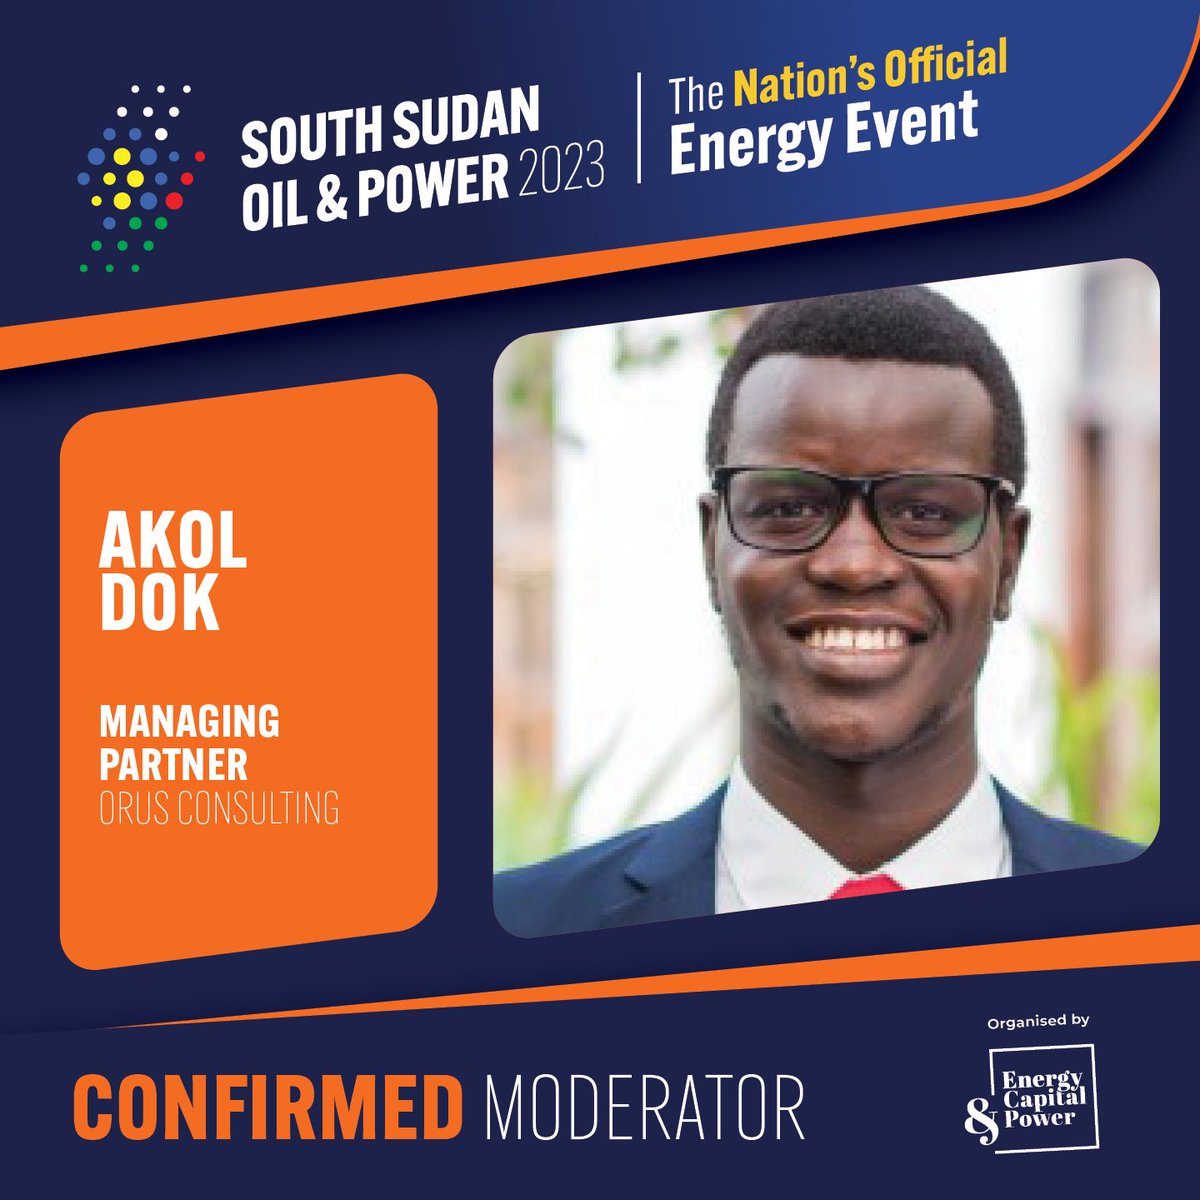 Thank you @EnergyCapPower for selecting me as a moderator in the upcoming South Sudan Oil and Power 2023. #SSOP23 #SSOT #SouthSudan #AfricanEnergy